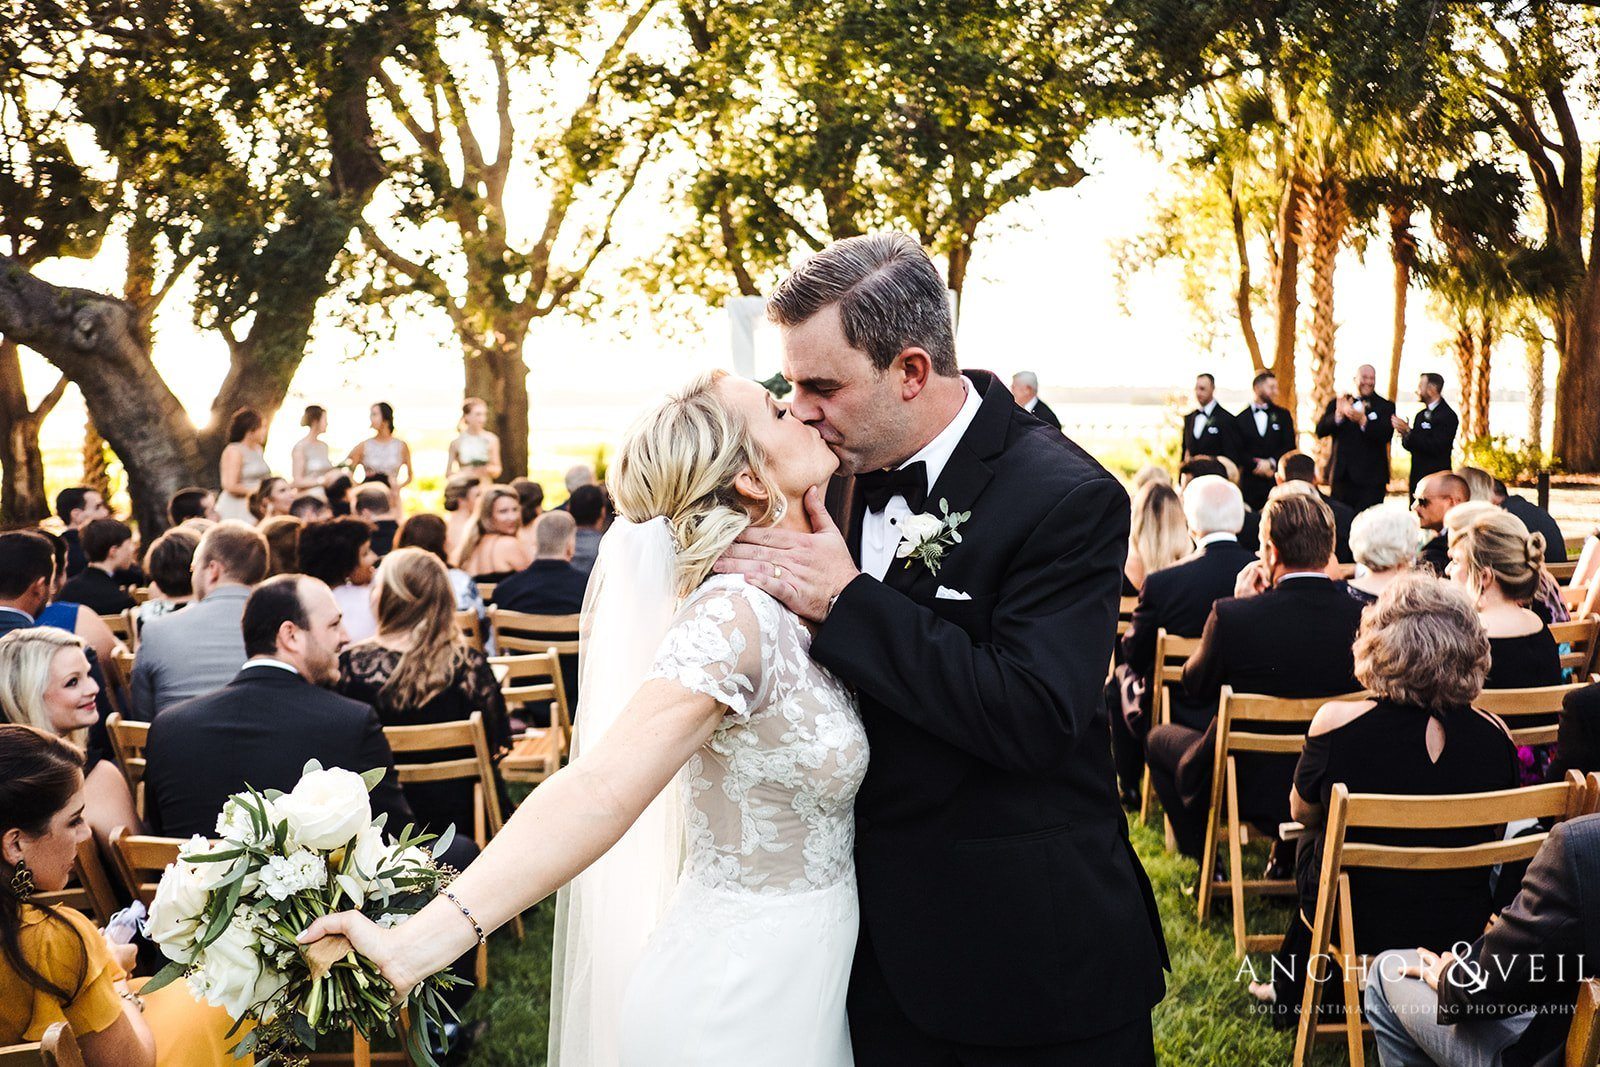 The bride and grooms kiss after walking down the isle at the Lowndes Grove Plantation Wedding